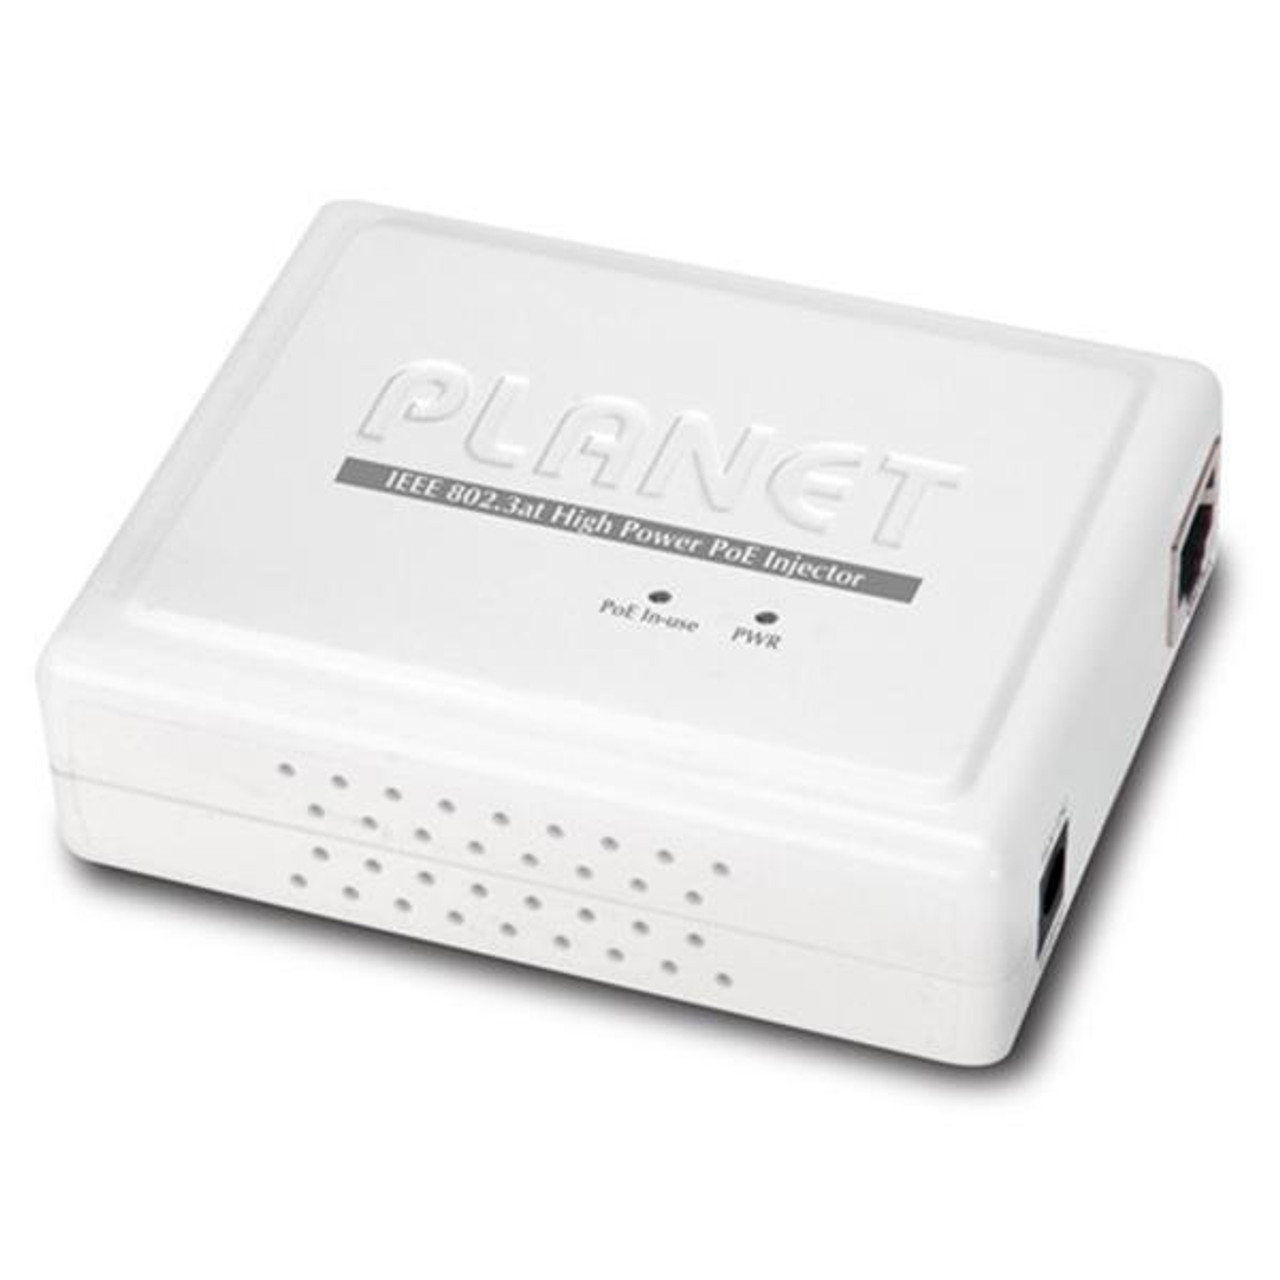 POE-161 Planet Technology IEEE802.3at High Power PoE Injector